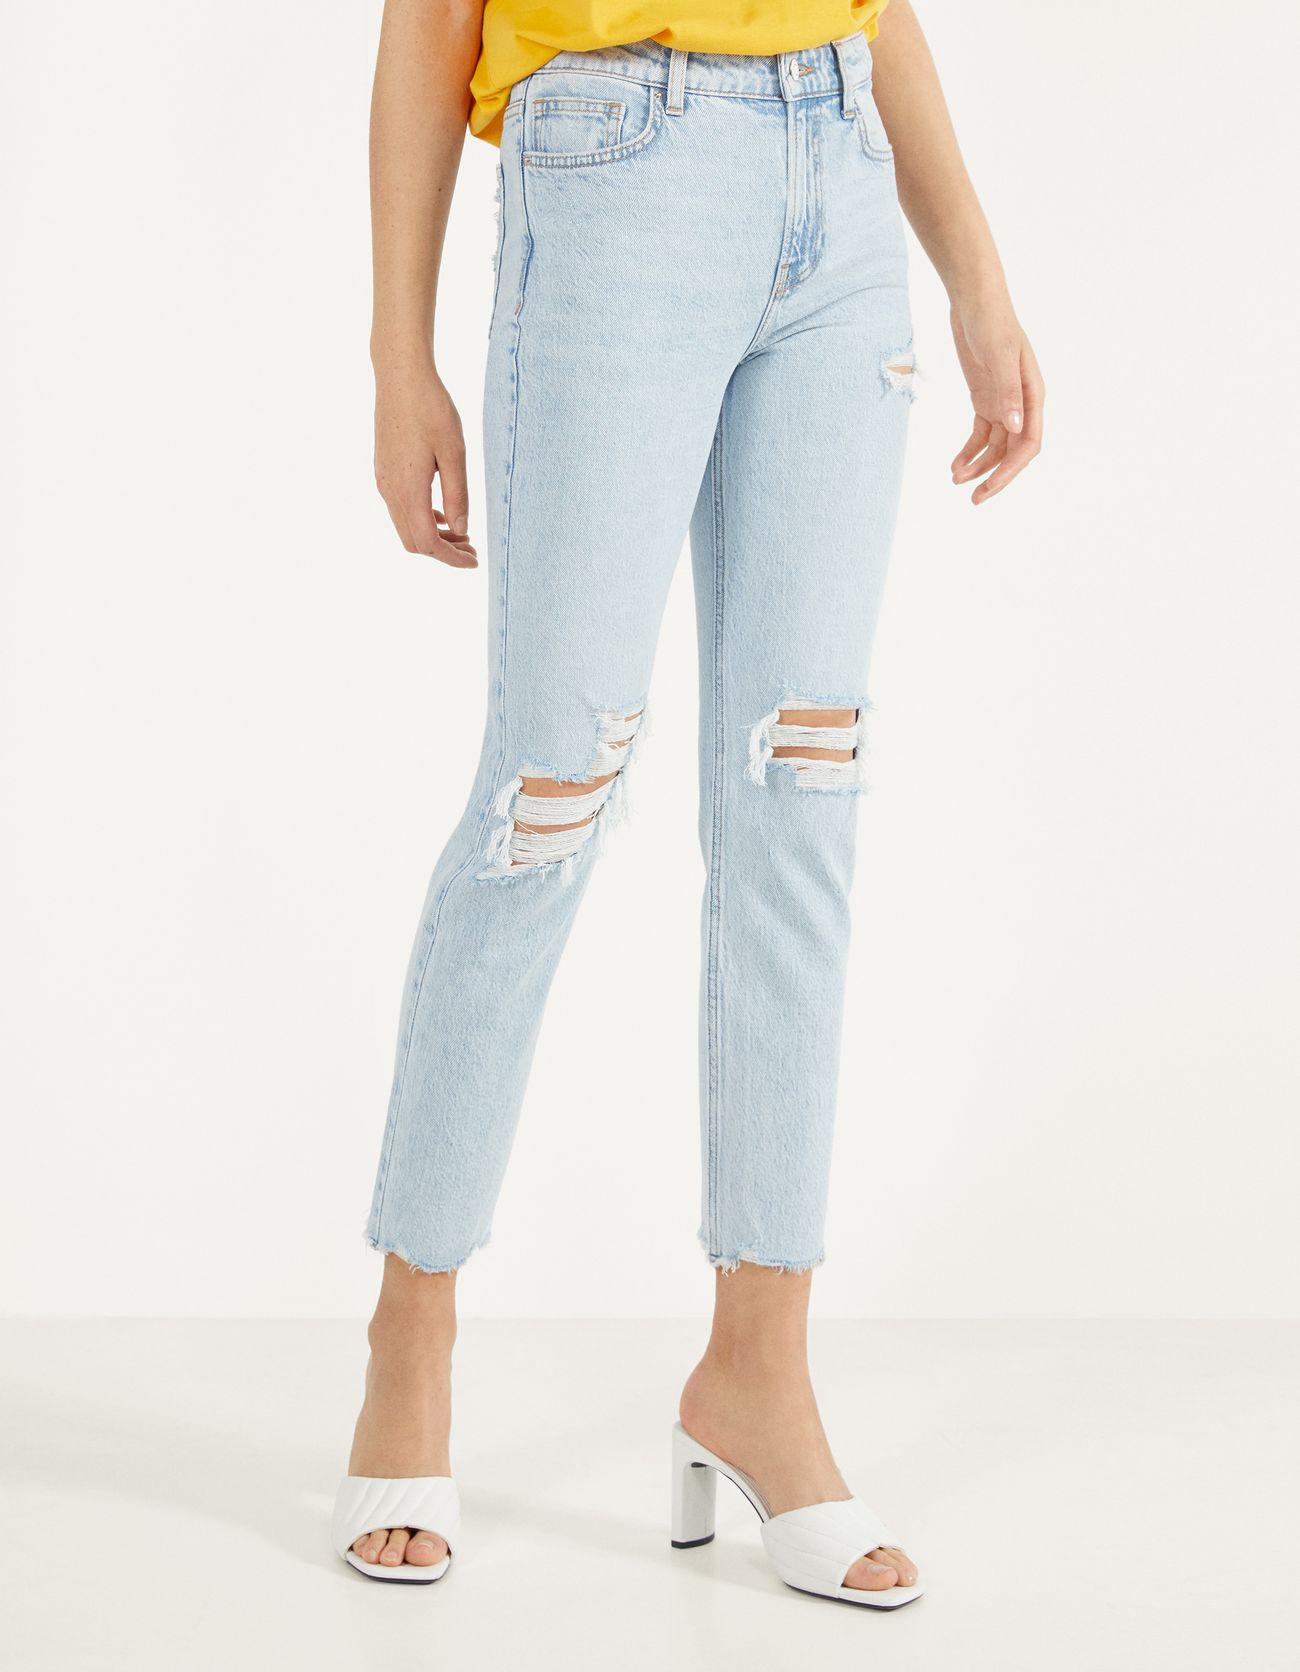 slim fit ripped jeans